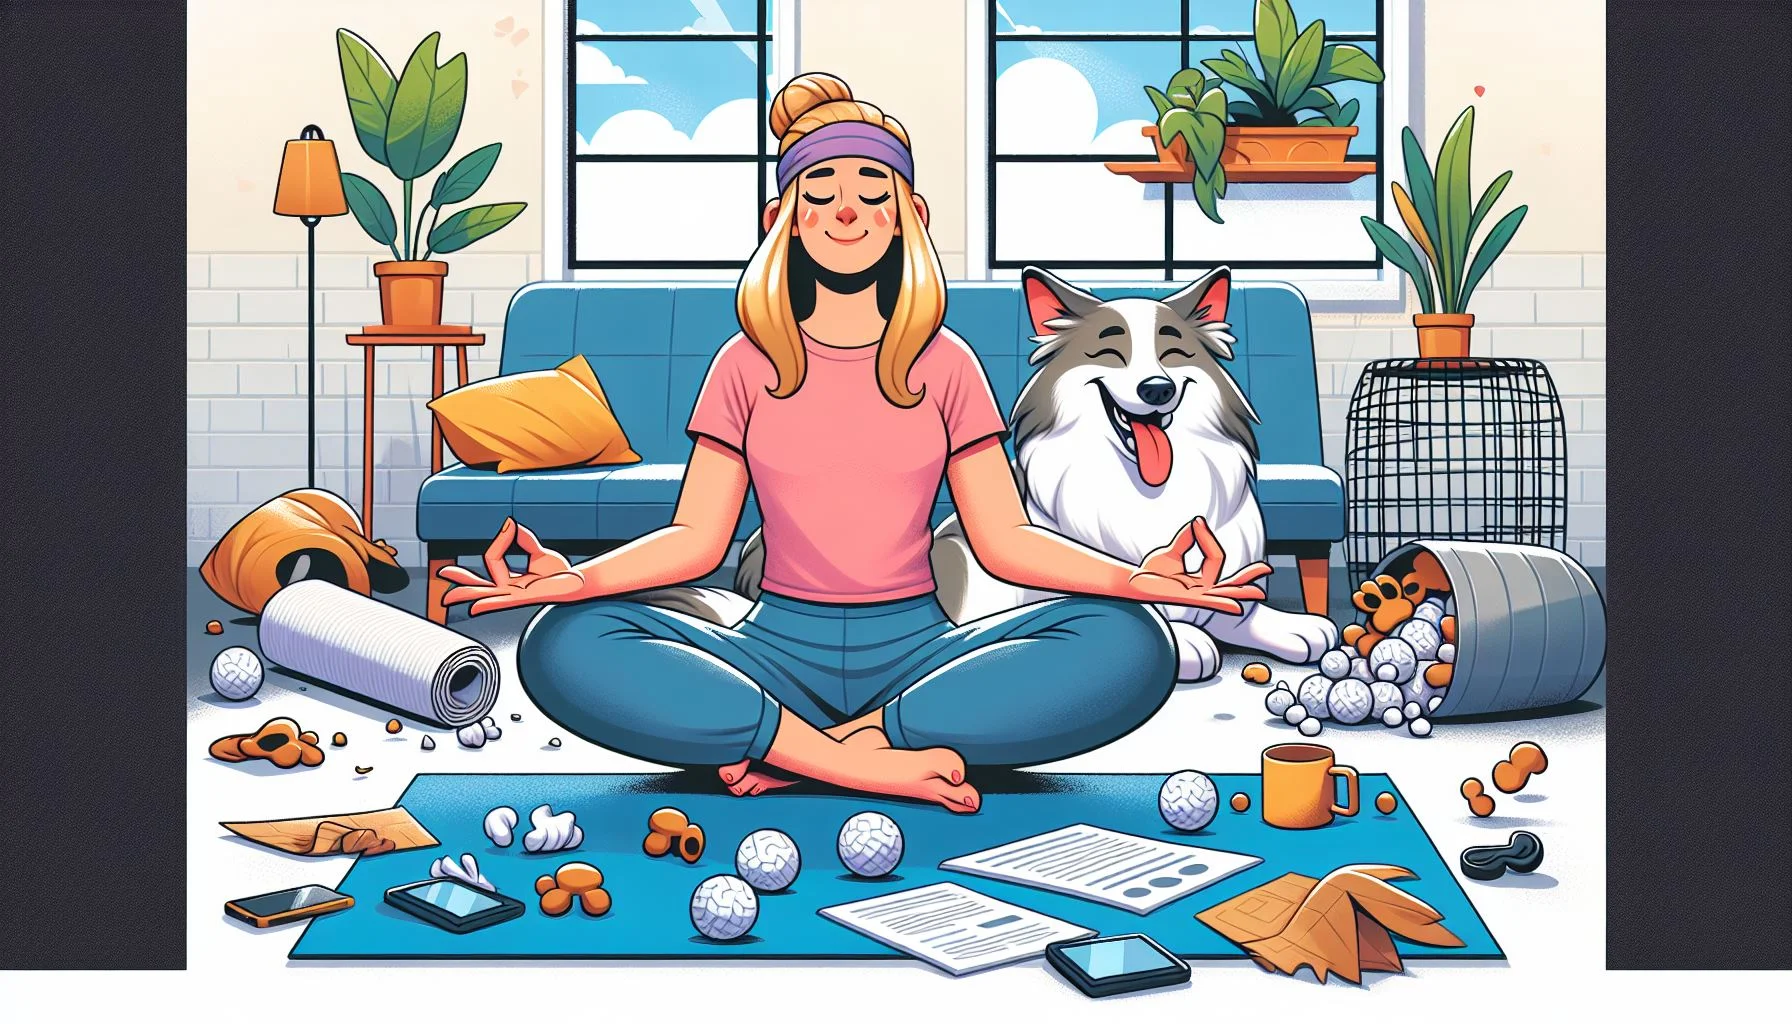 Pet Influencer meditating on yoga mat at home while pet causes chaos behind them.